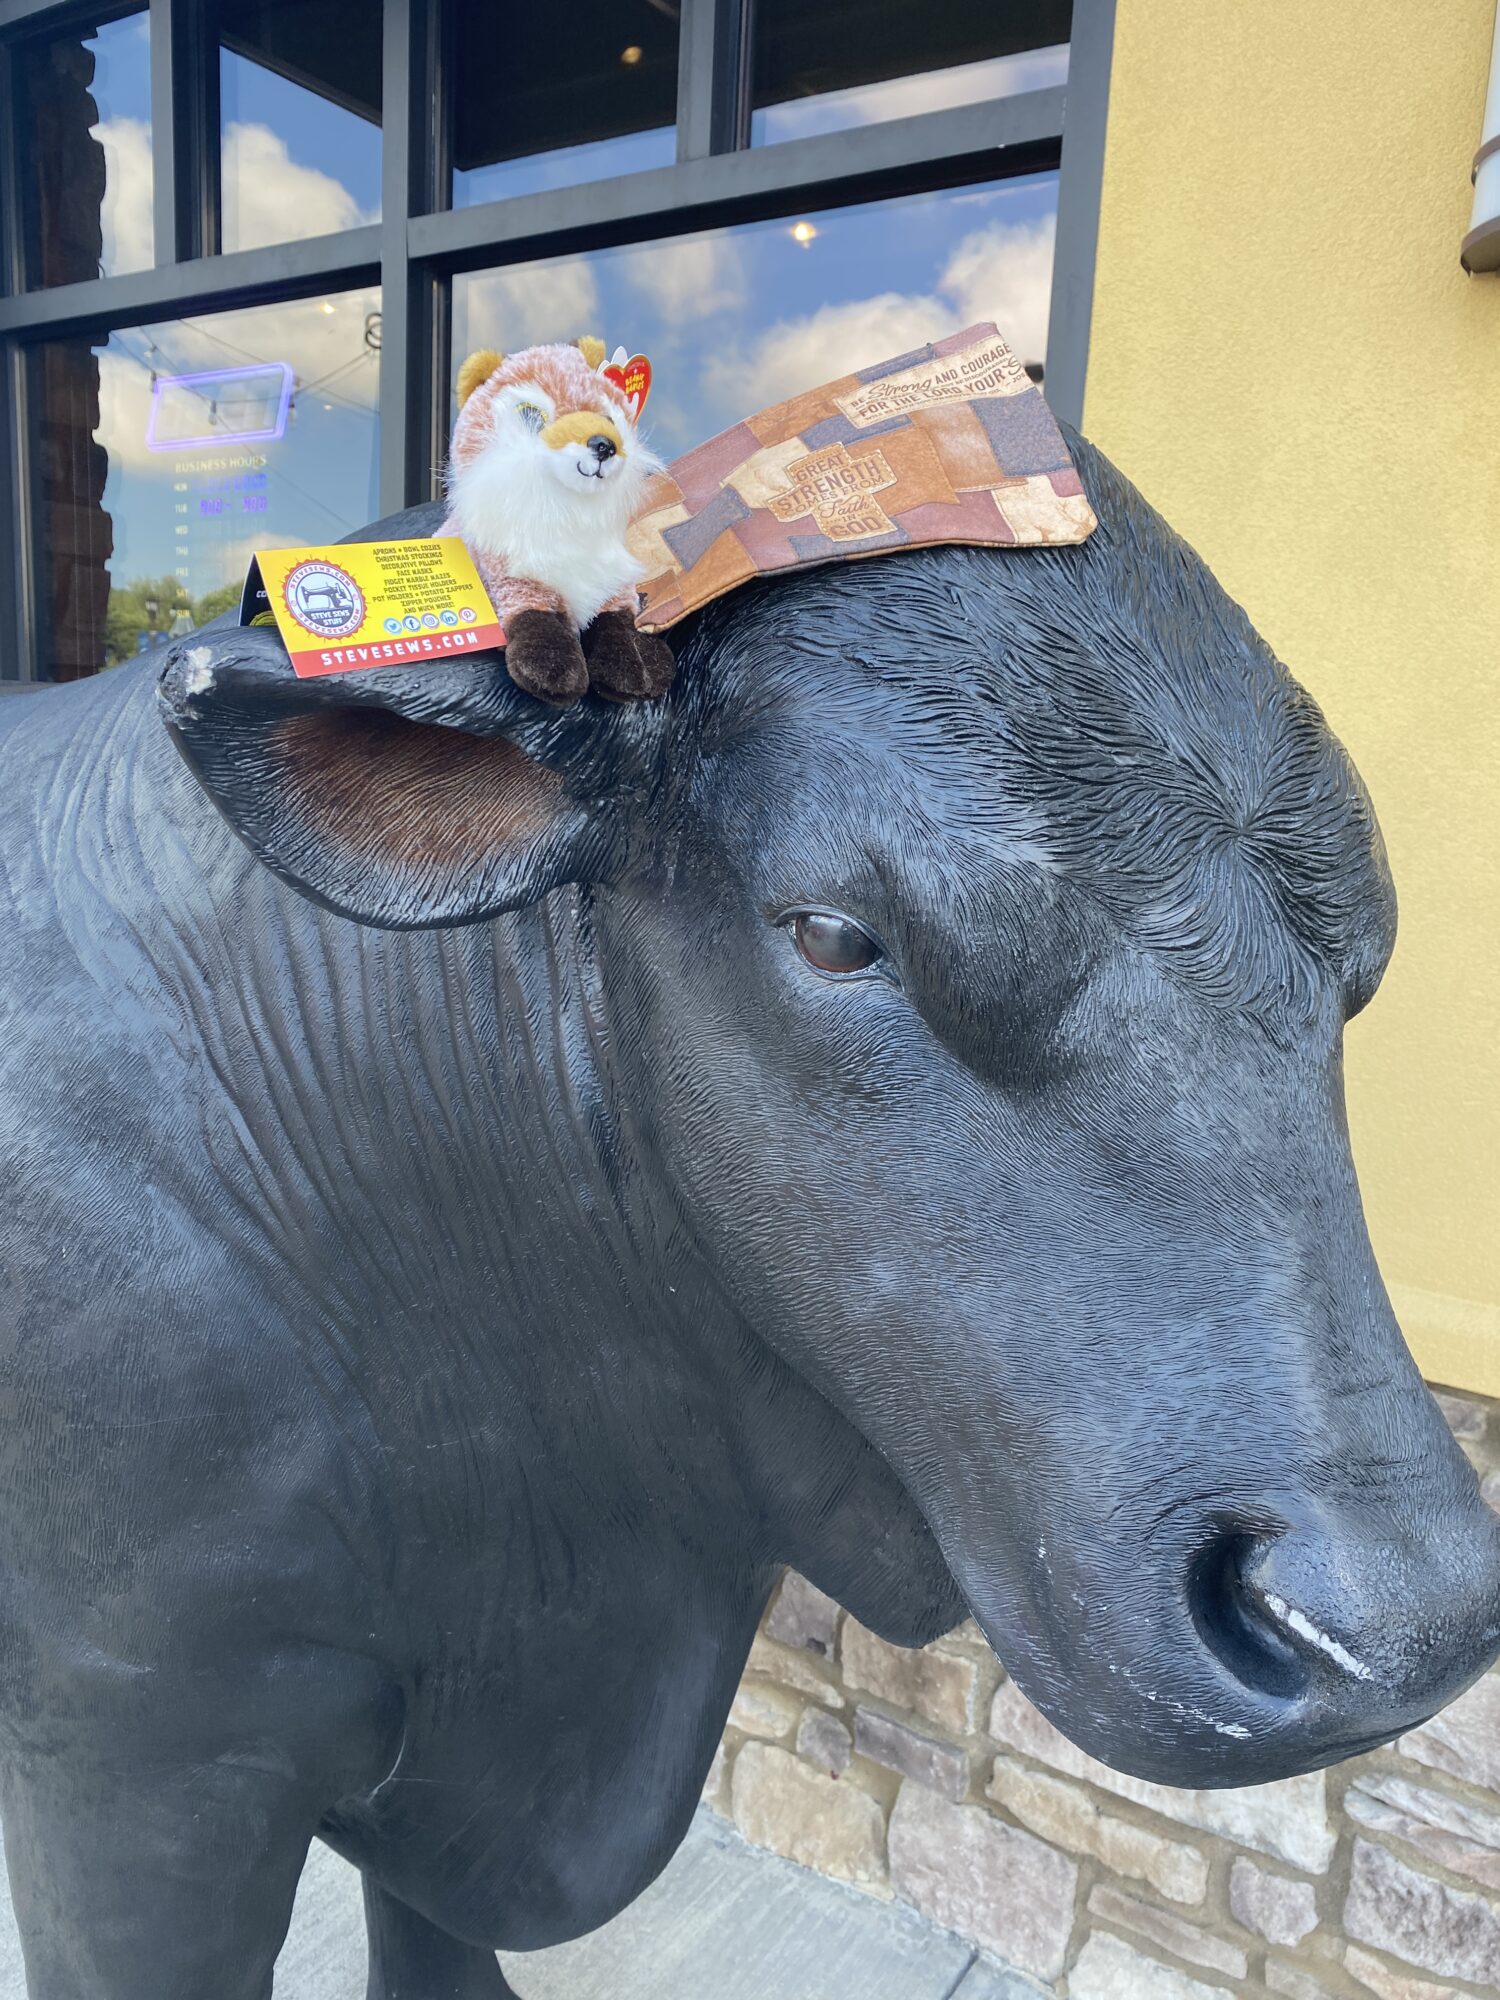 Meet Fredrick, newest loveee,who is on this cow showing off the Be Strong Christian Zipper Pouch – Here is a leather appearance zipper pouch with scriptures on it about being strong. #BeStrong #BeCourageous #Joshua19